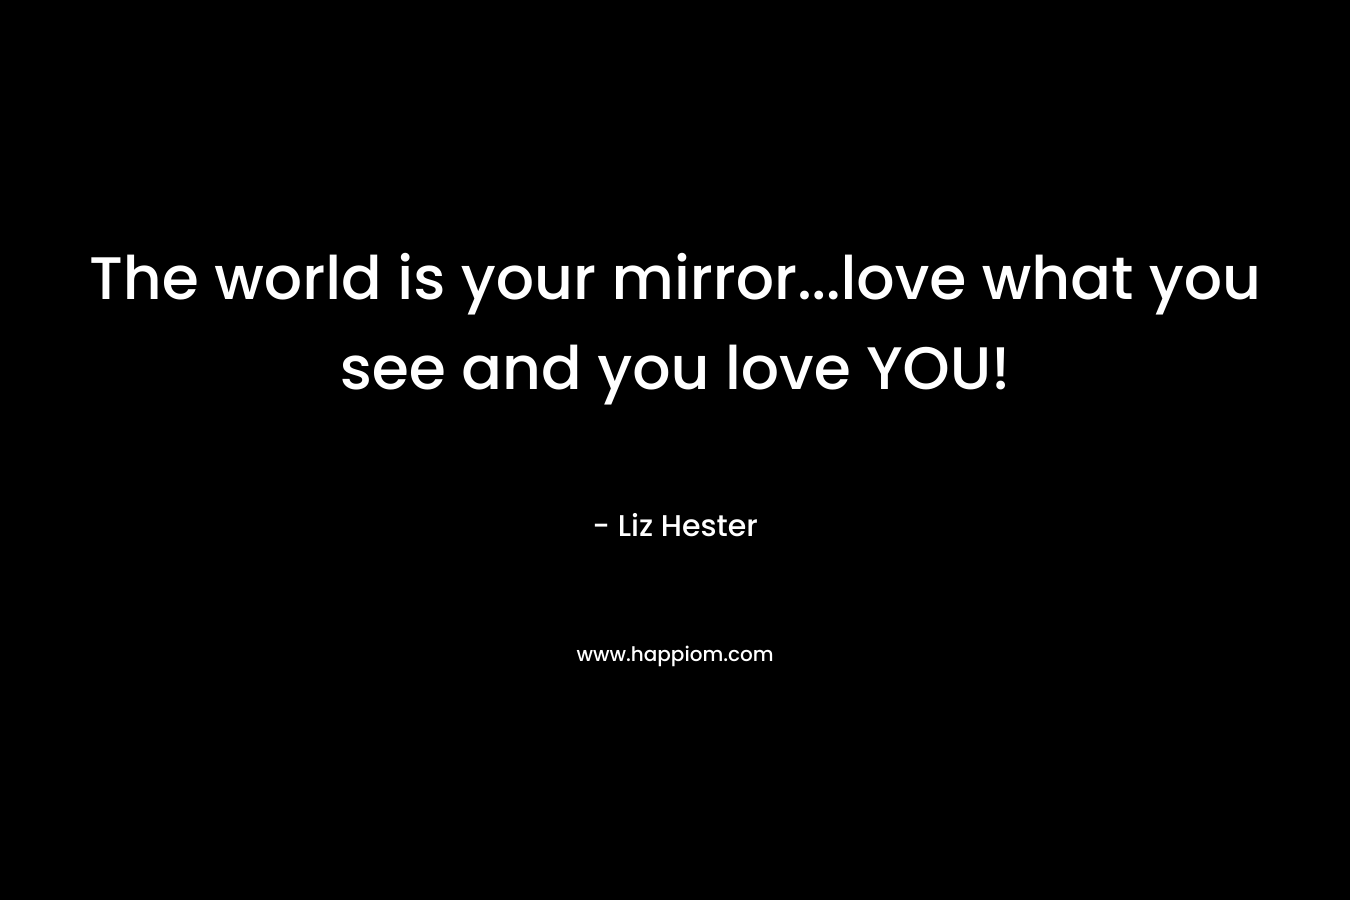 The world is your mirror...love what you see and you love YOU!